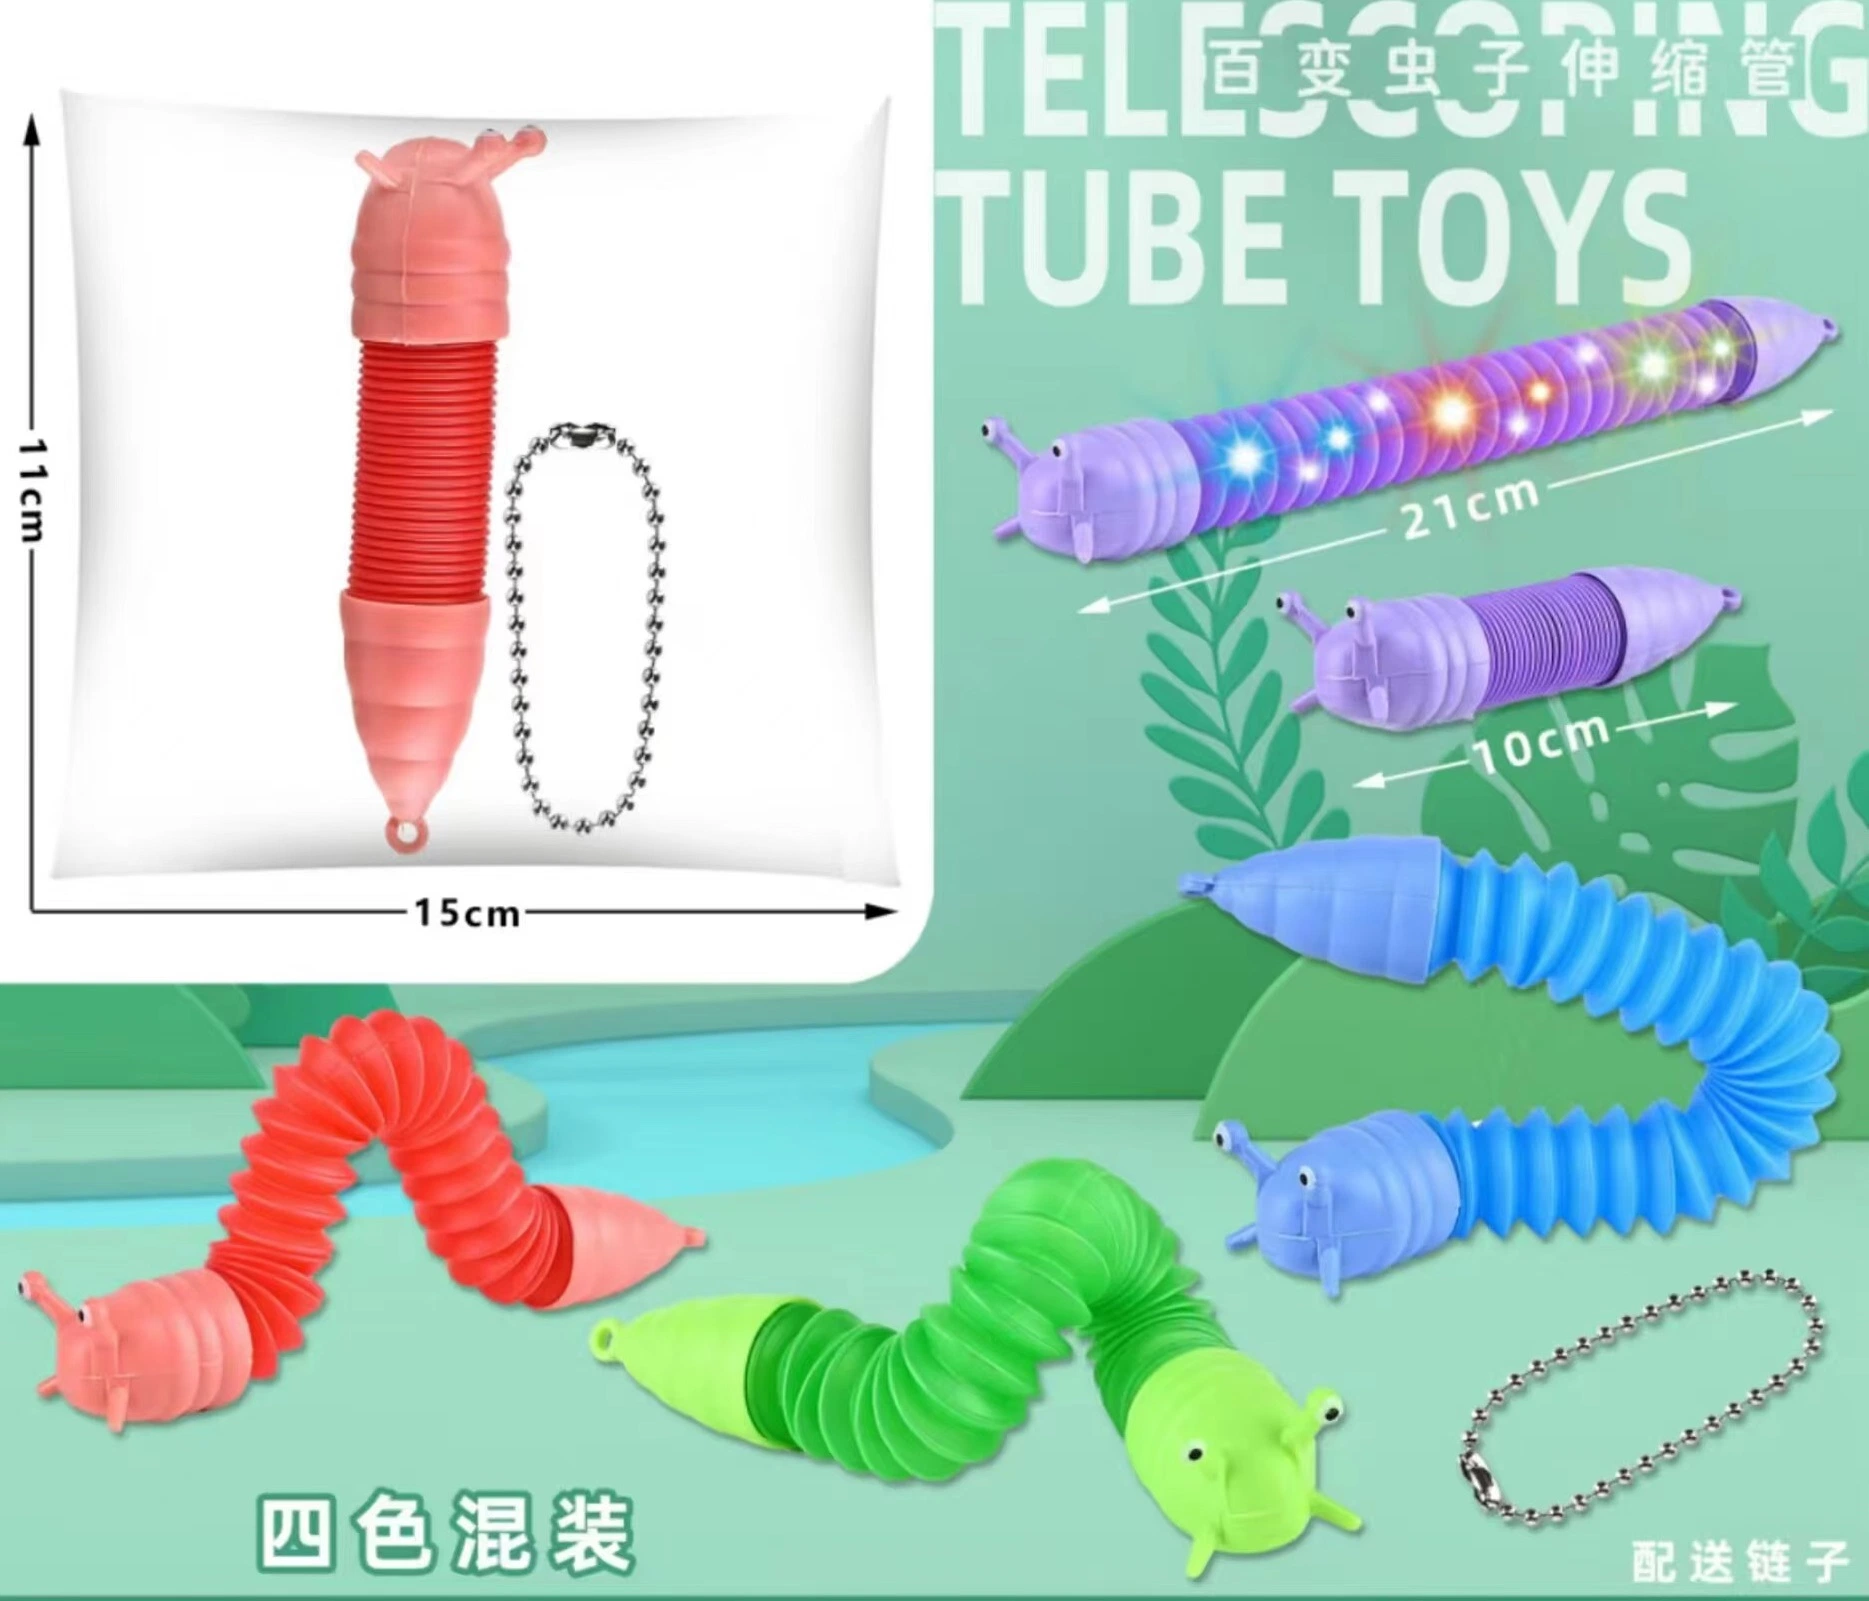 DIY Colorful Tubes Toys Educational Fidget Toys Relieve Stress Novelty Toy with Lights